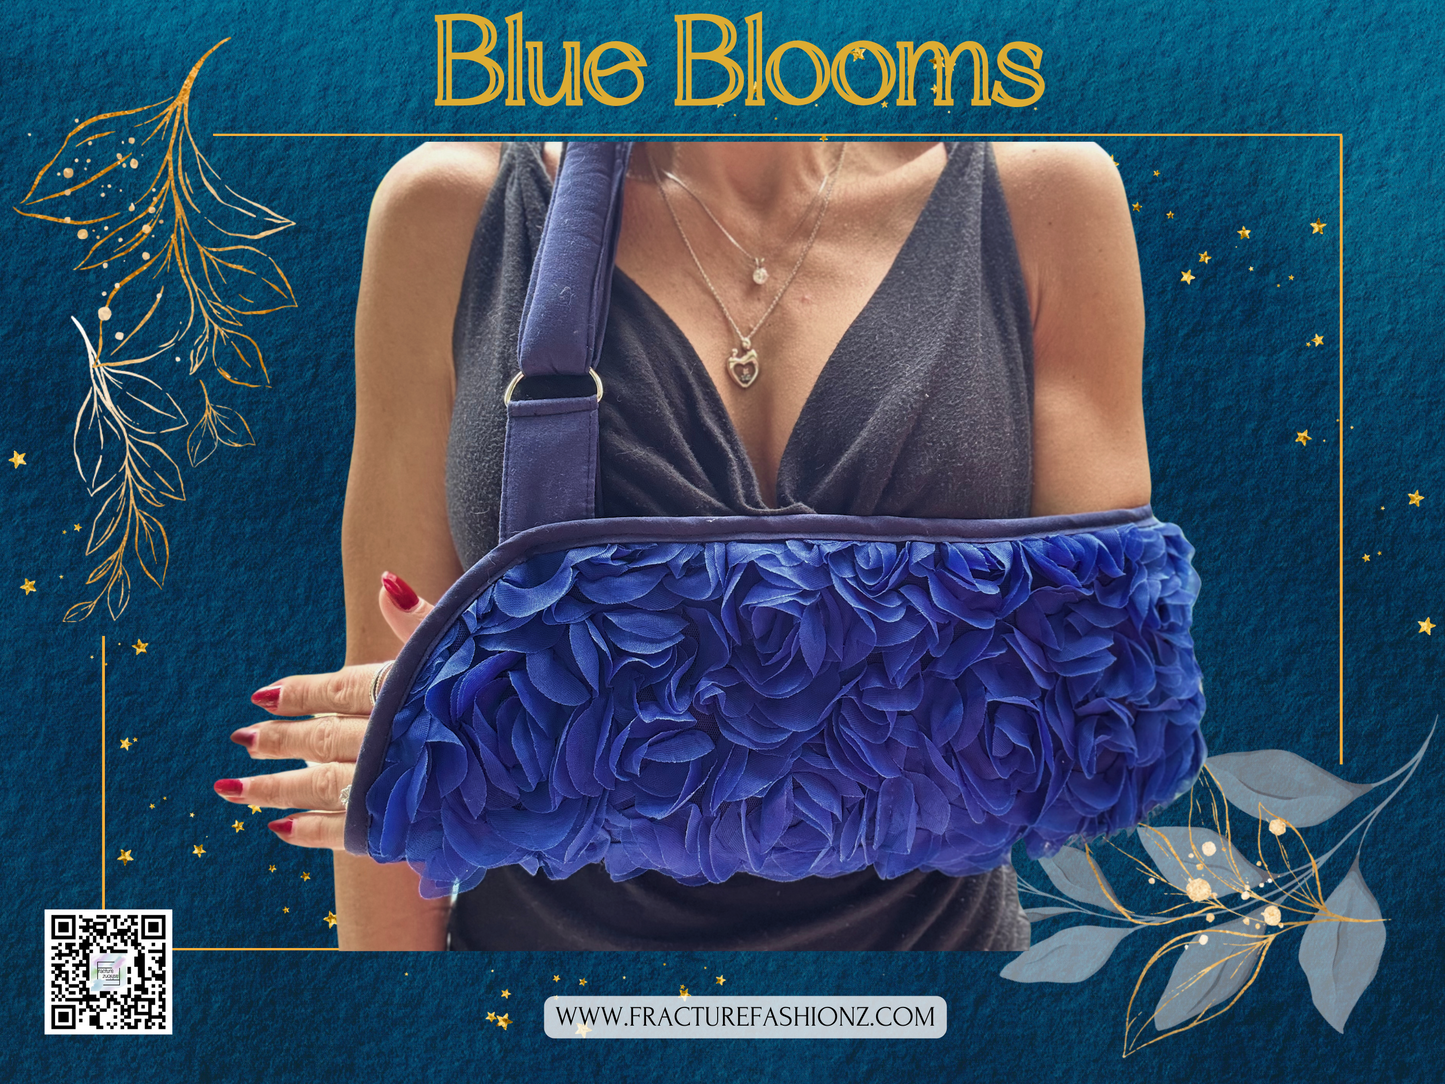 Royal Blue Blooms: Luxurious Padded Arm Sling with Chiffon 3D Flowers